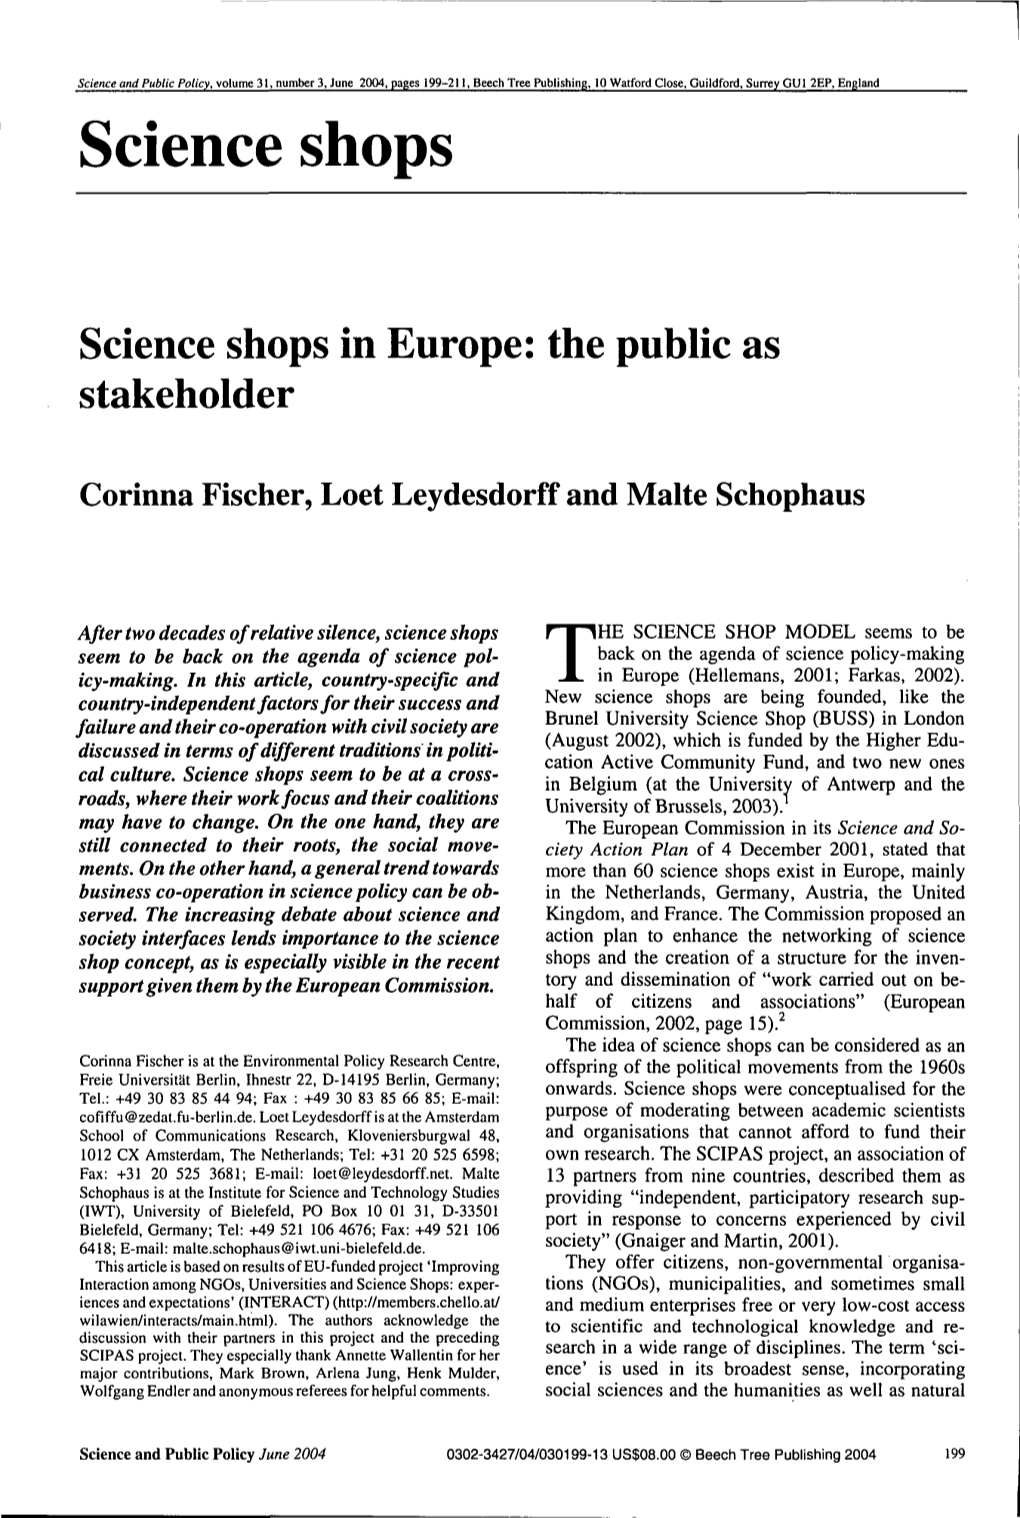 Science Shops in Europe: the Public As Stakeholder